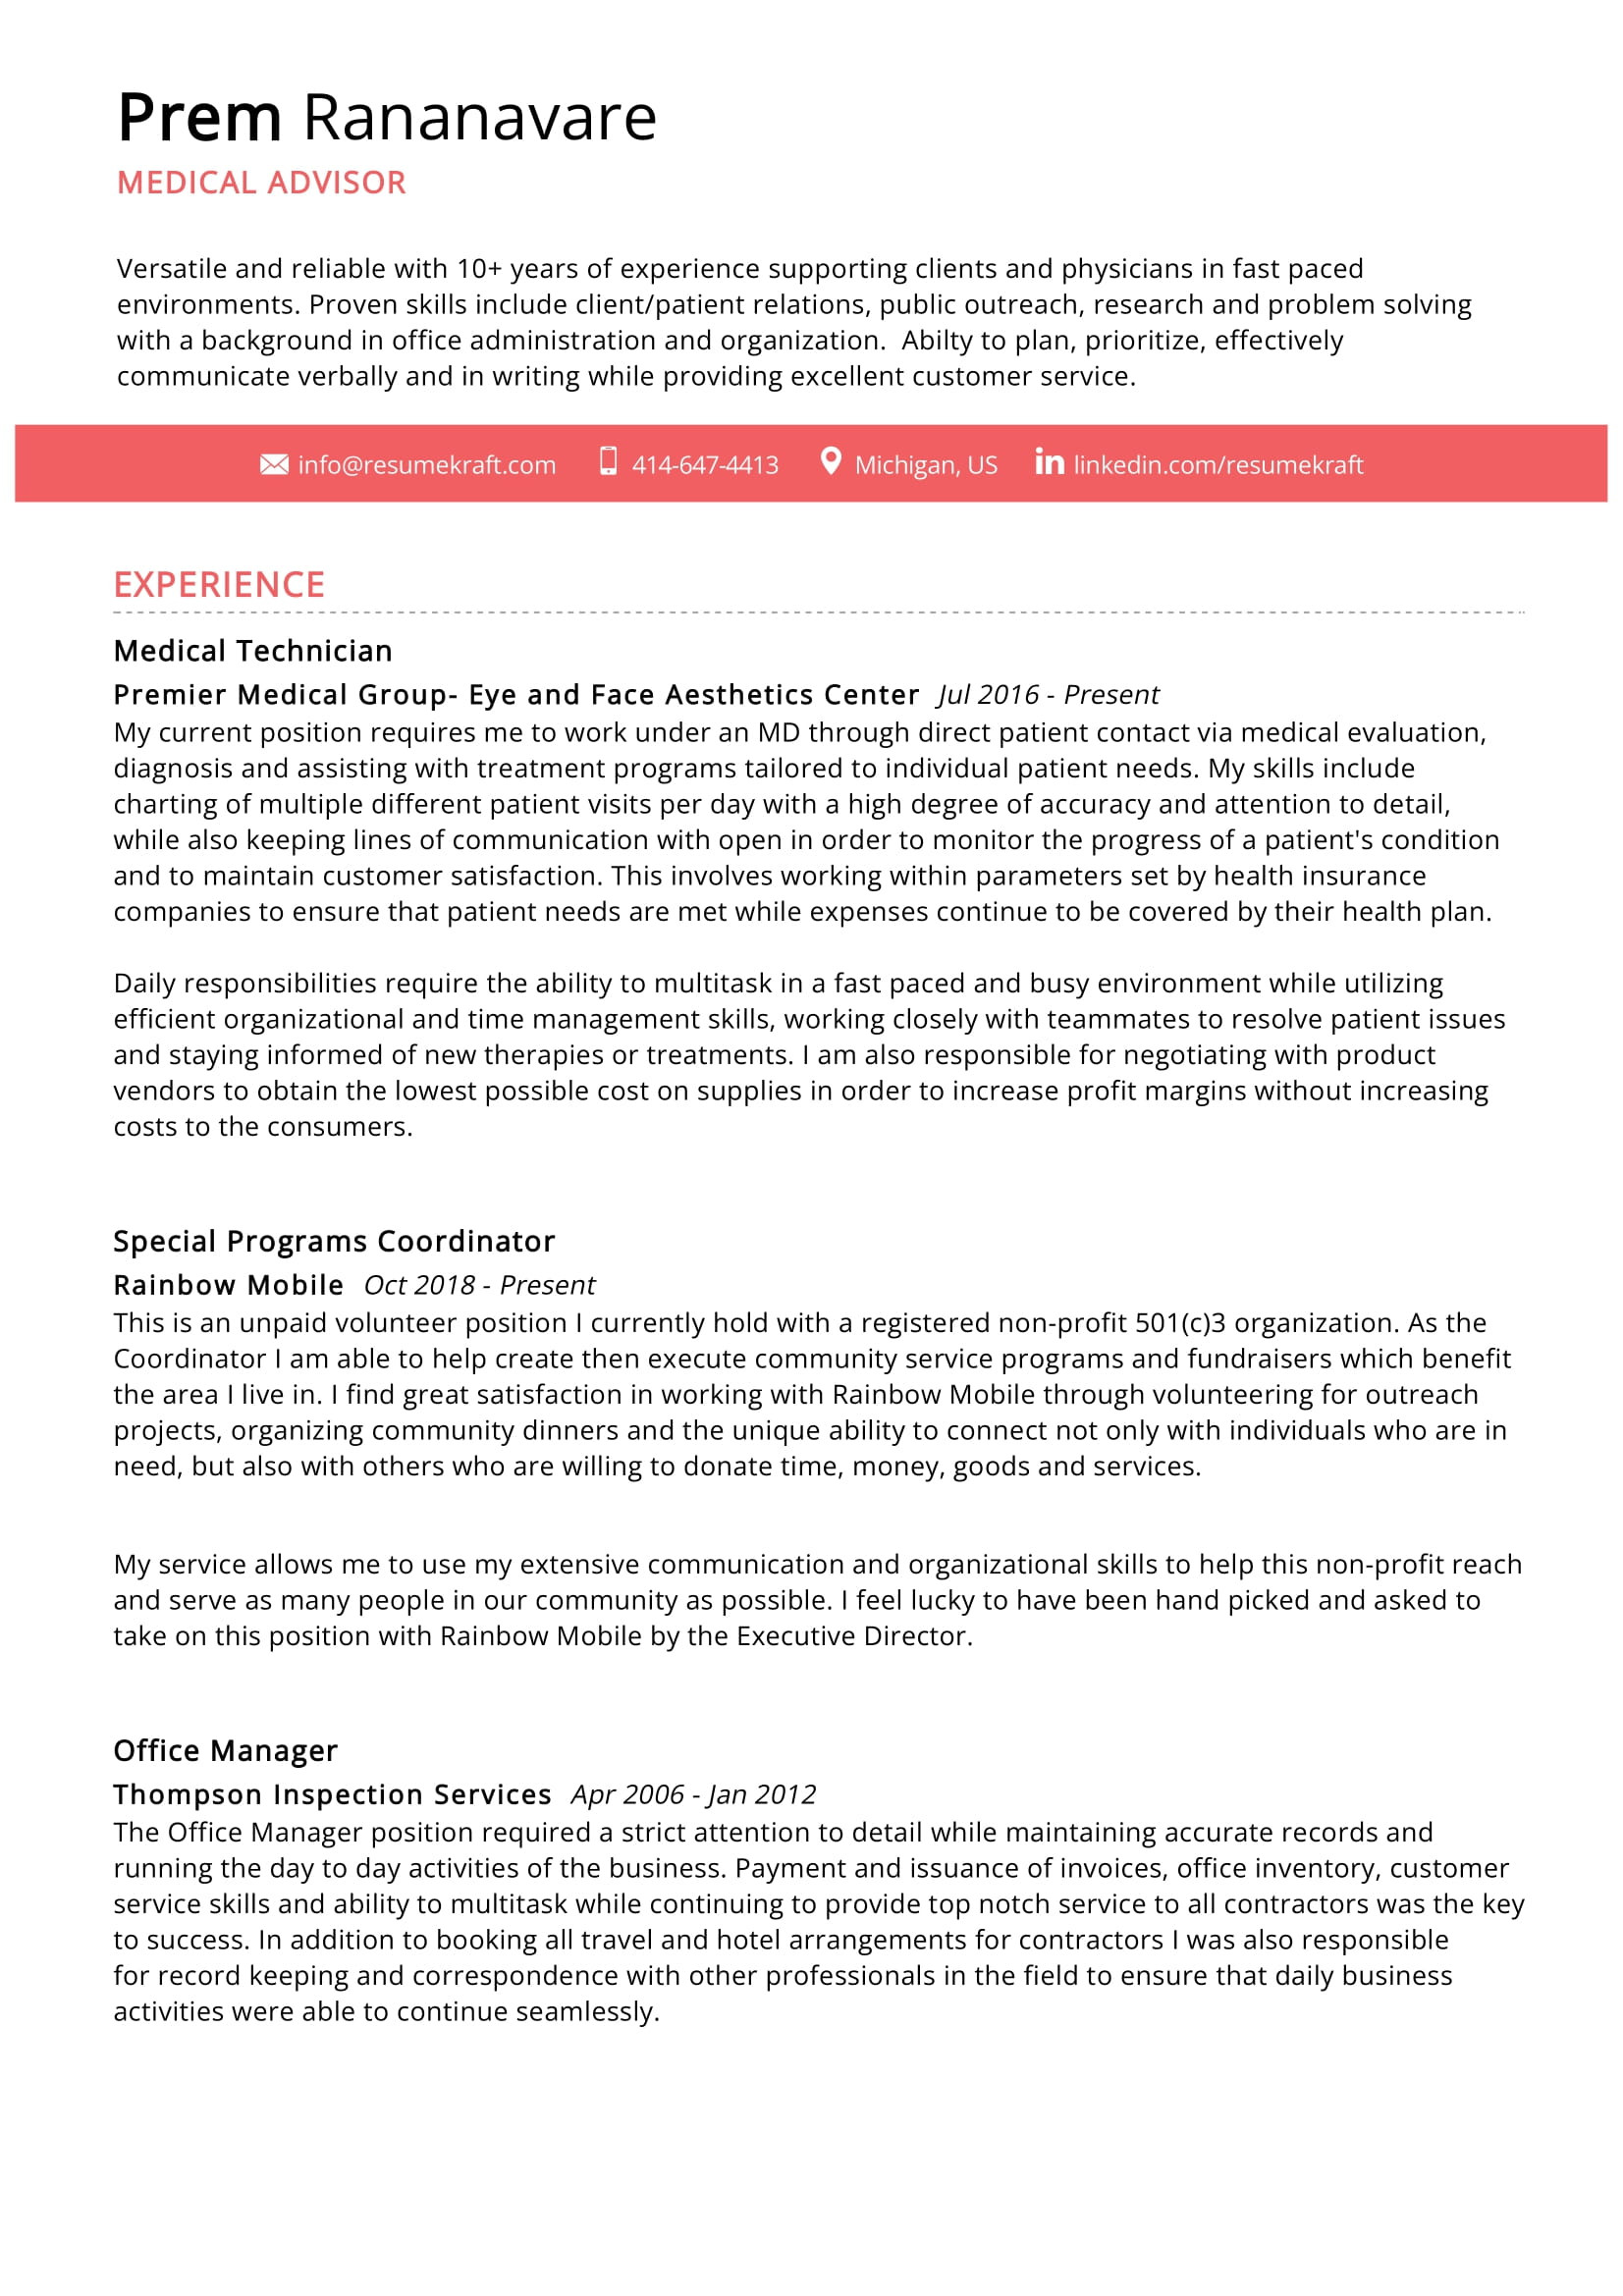 Sample Resume Healthcare Administrative Support with 10 Years Experience Medical Advisor Sample Resume 2022 Writing Tips – Resumekraft